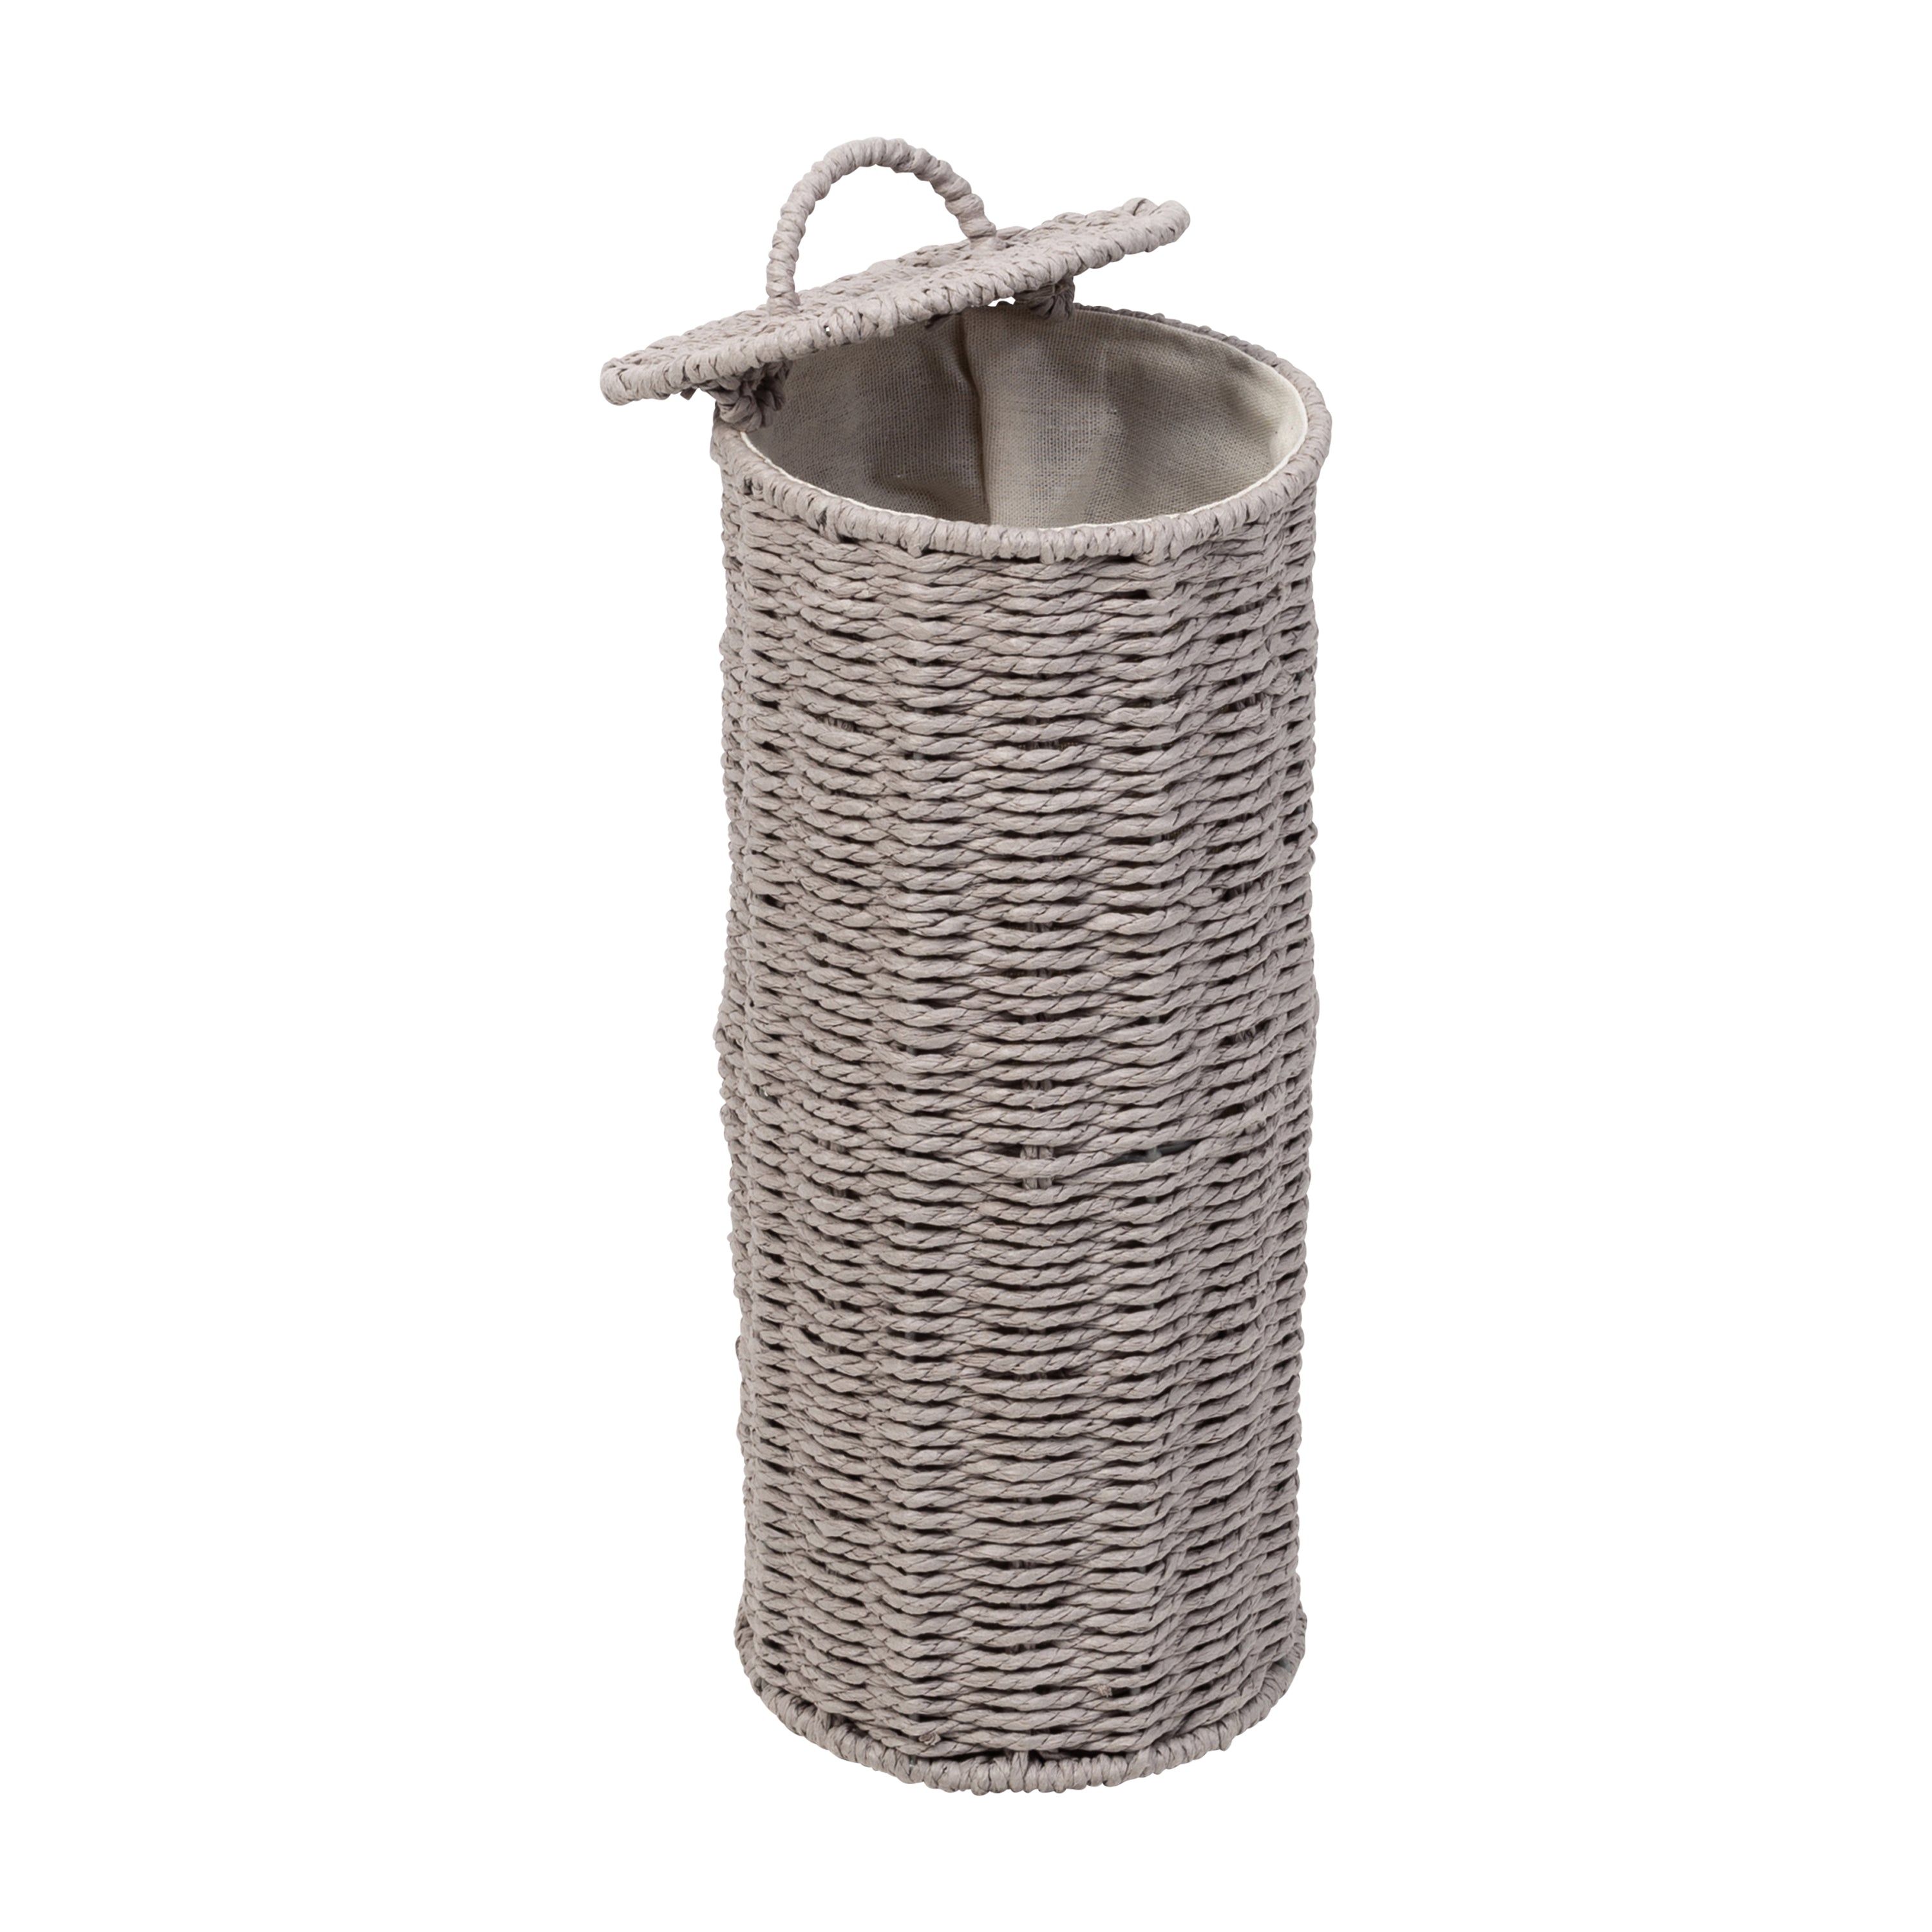 StorageWorks Toilet Paper Storage, Grey Round Paper Rope Bathroom Basket,  Small Baskets for Organizing, Toilet Paper Basket with Built-in Handles, 14